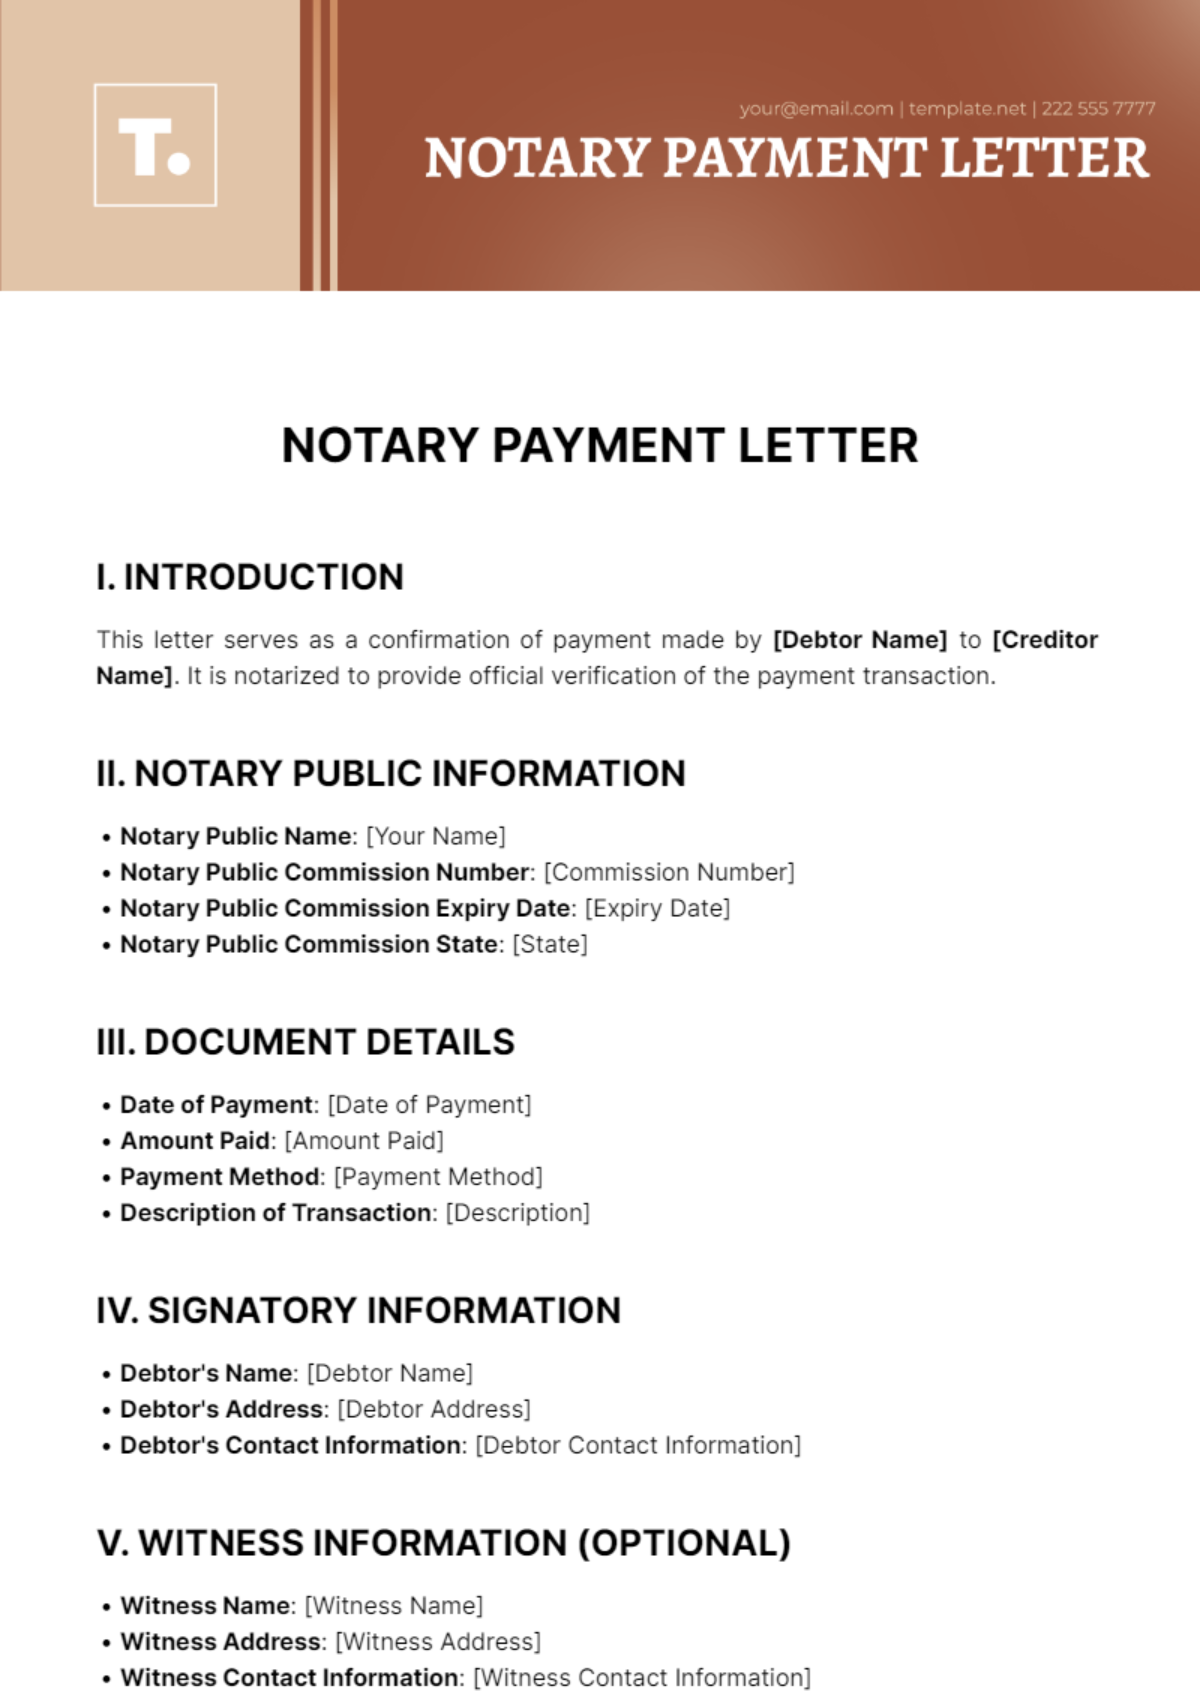 Free Notary Payment Letter Template